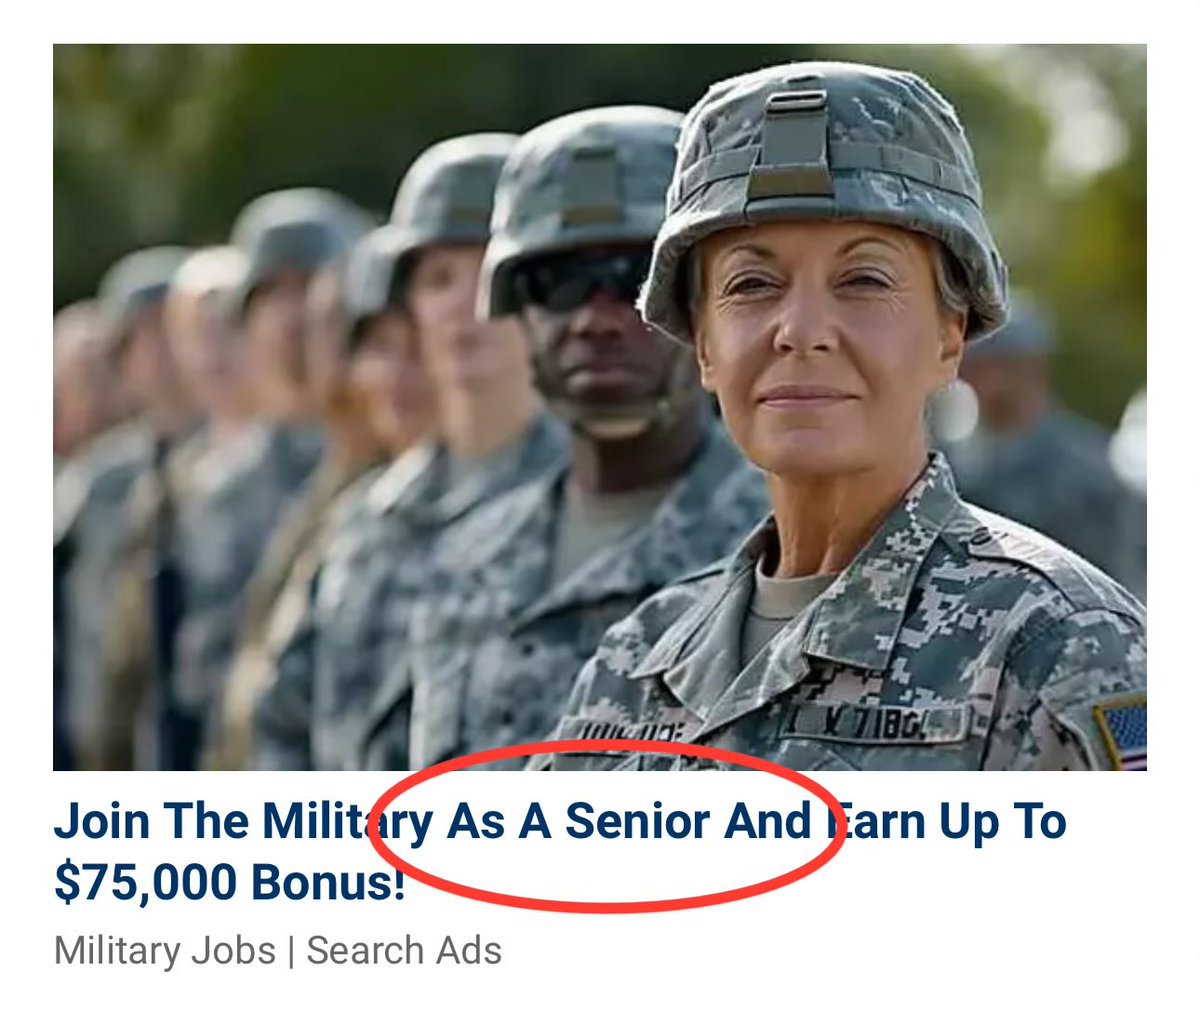 I was just reading an article and saw this advertisement… Is military recruitment that bad?